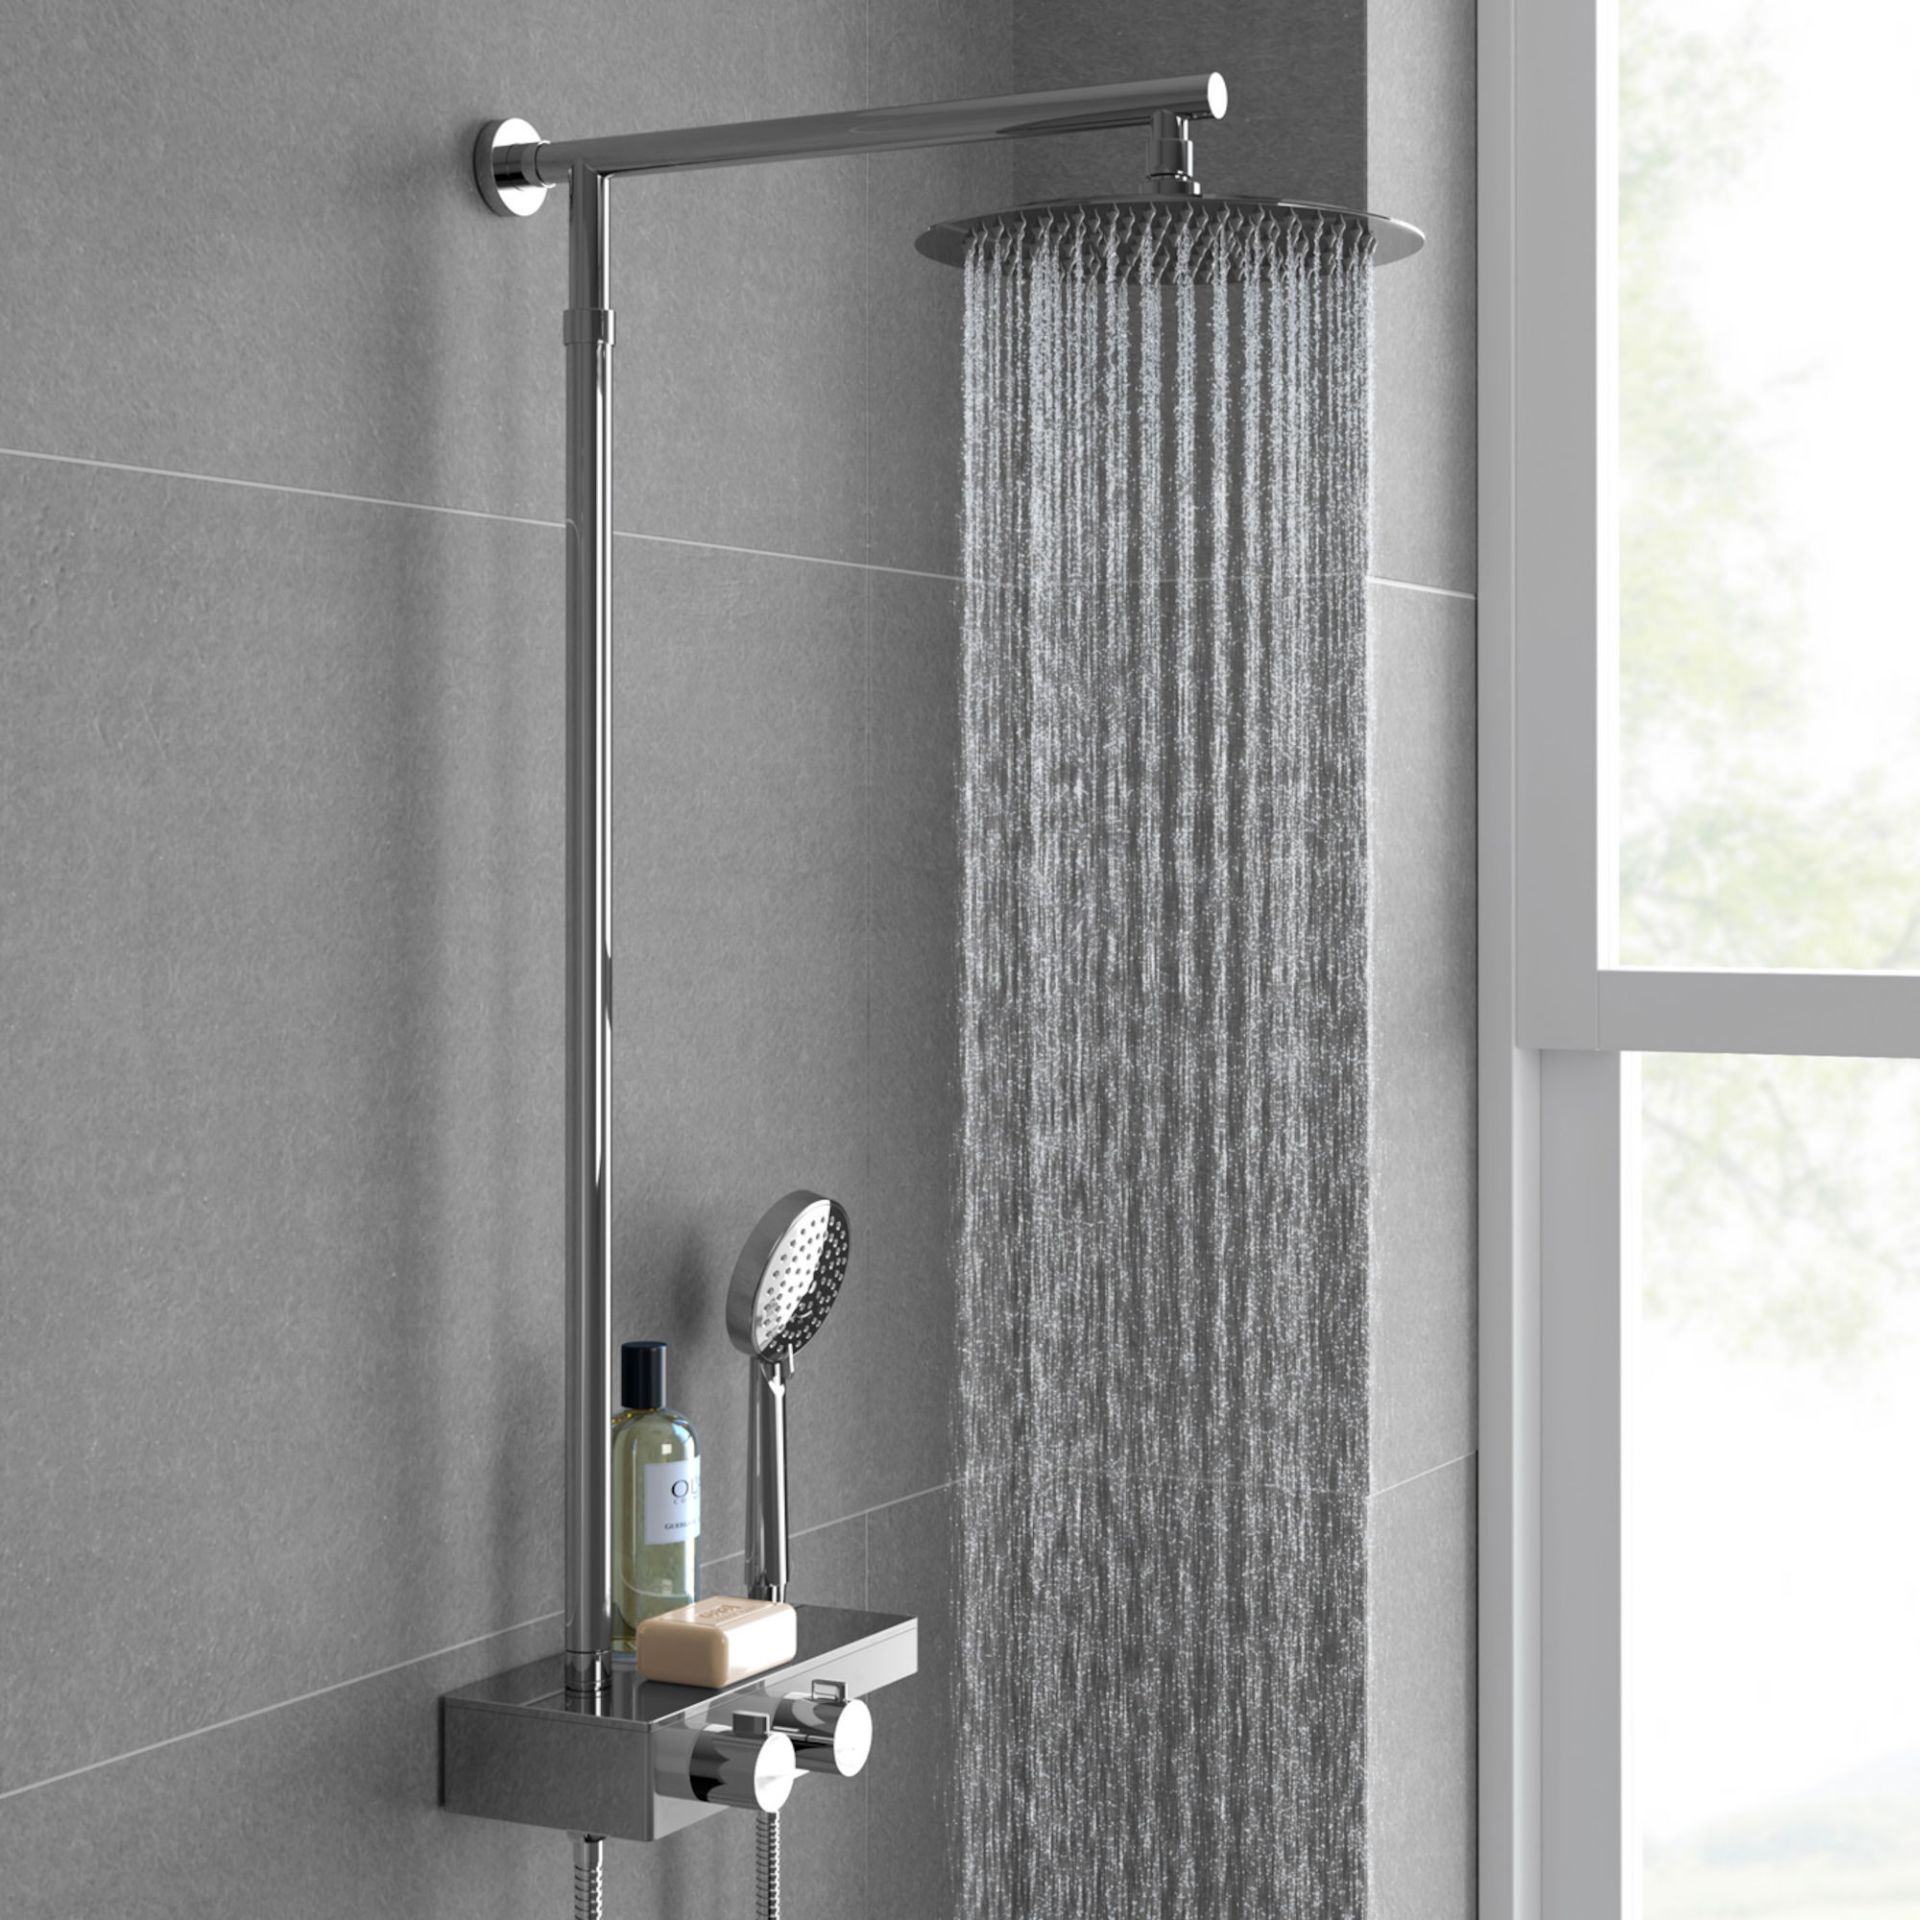 (ZL36) Round Exposed Thermostatic Mixer Shower Kit & Large Head. Cool to touch shower for additional